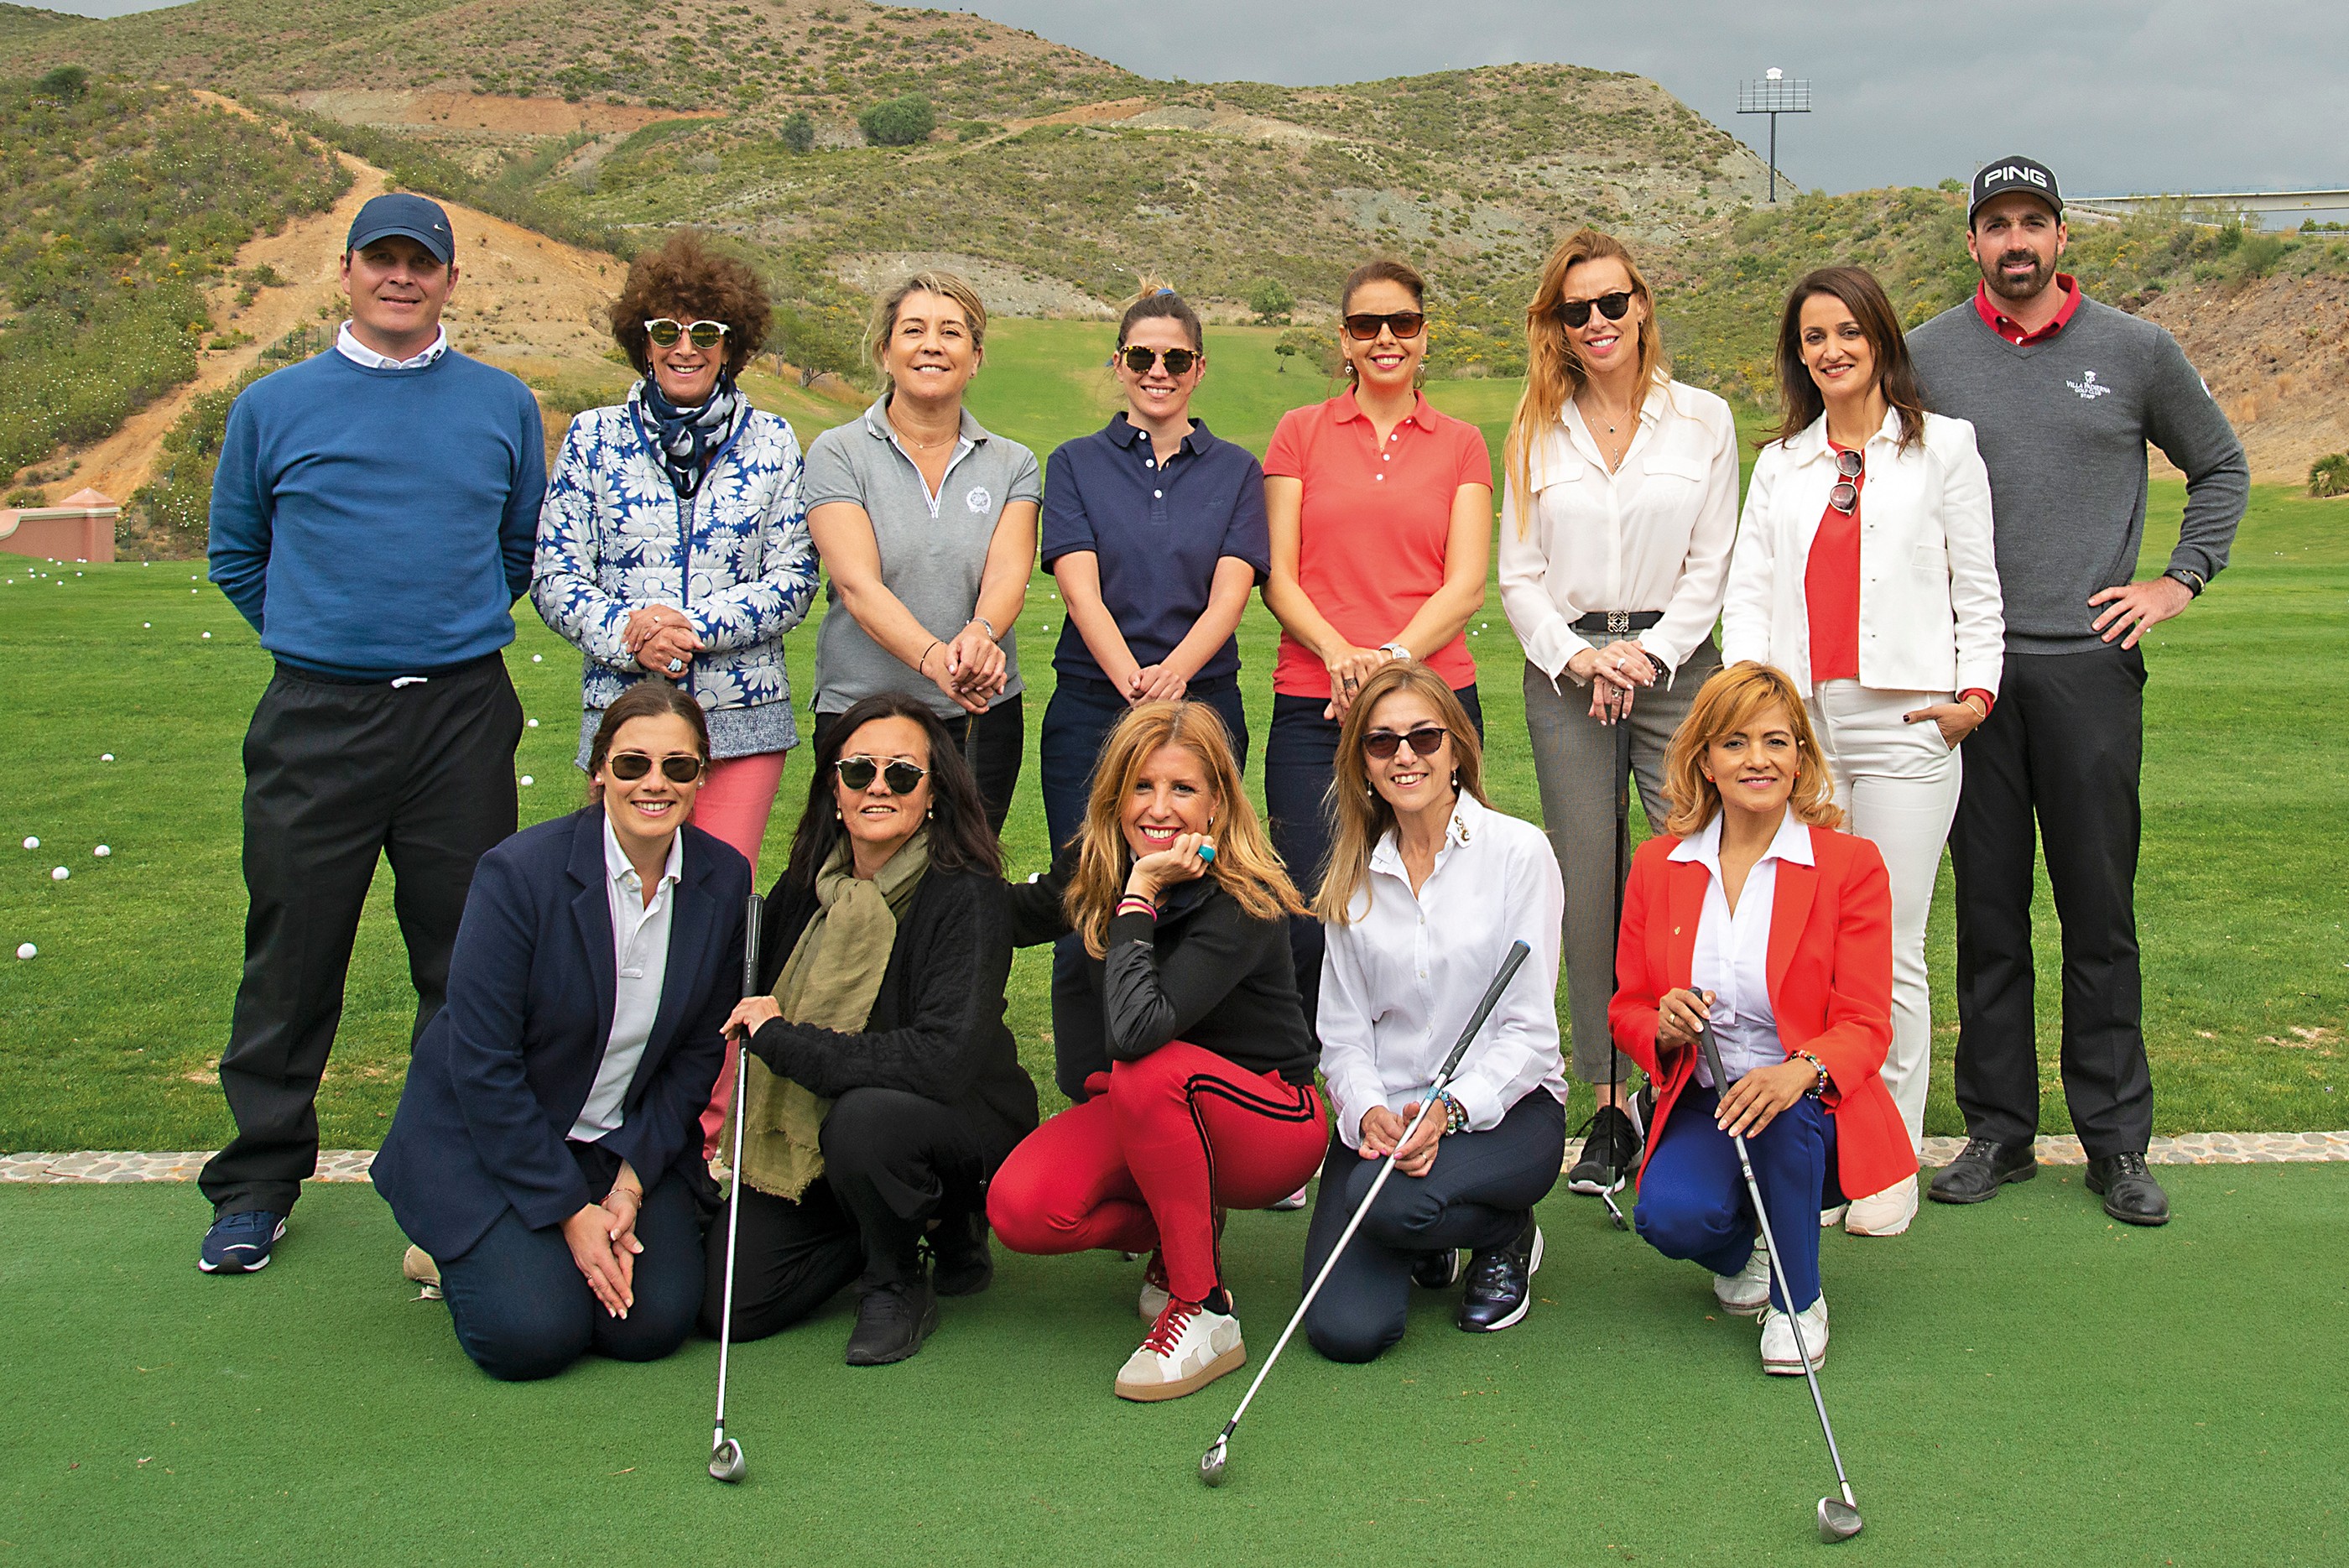 Firts Ladies in Golf Bautism & Networking